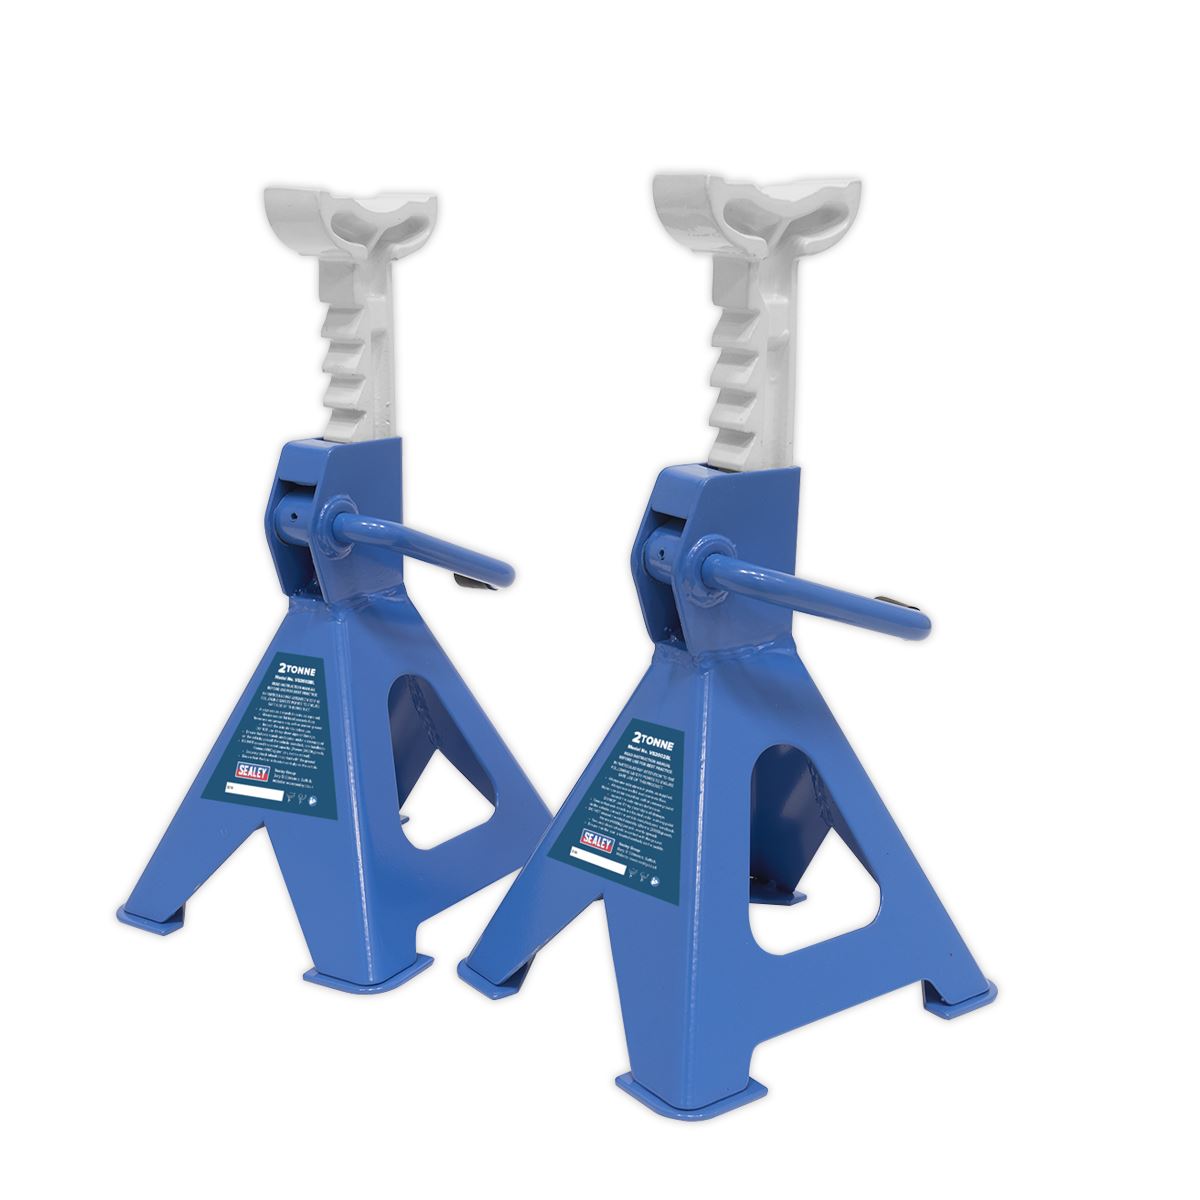 Sealey Axle Stands (Pair) 2 Tonne Capacity per Stand Ratchet Type - Blue